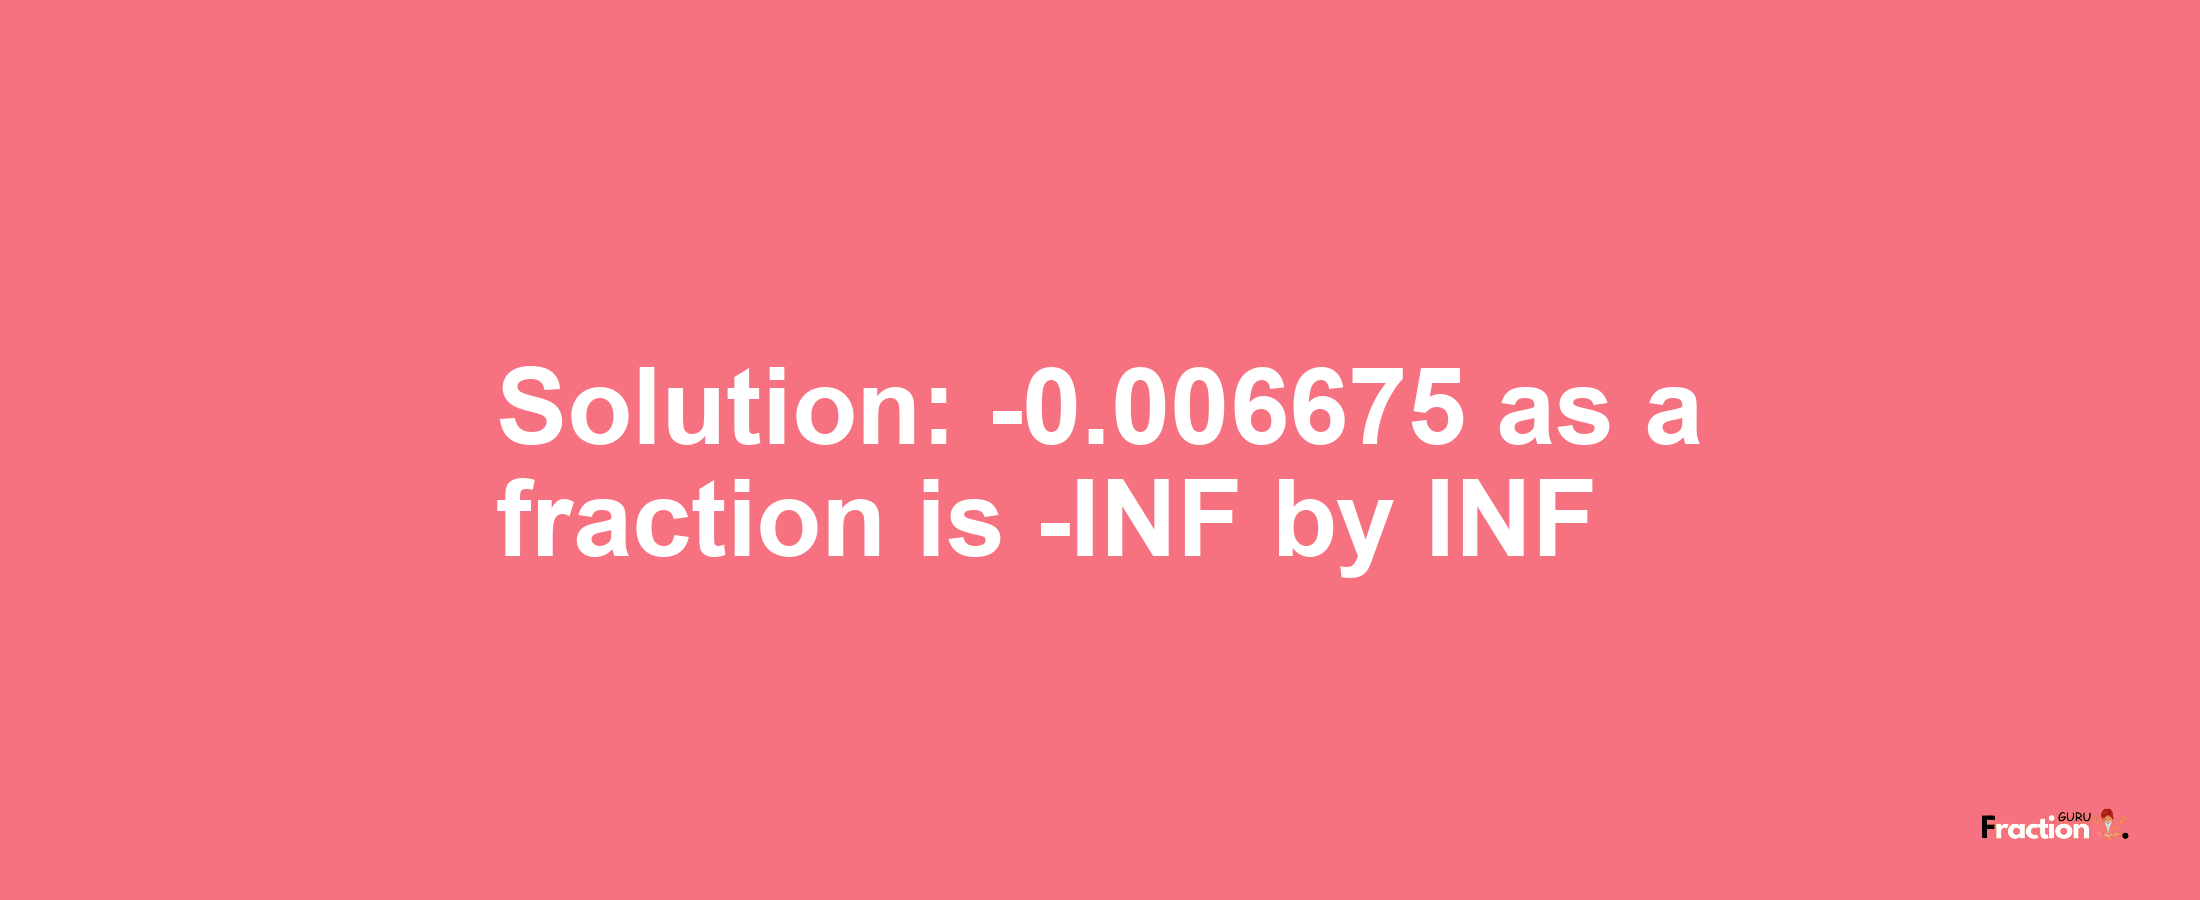 Solution:-0.006675 as a fraction is -INF/INF